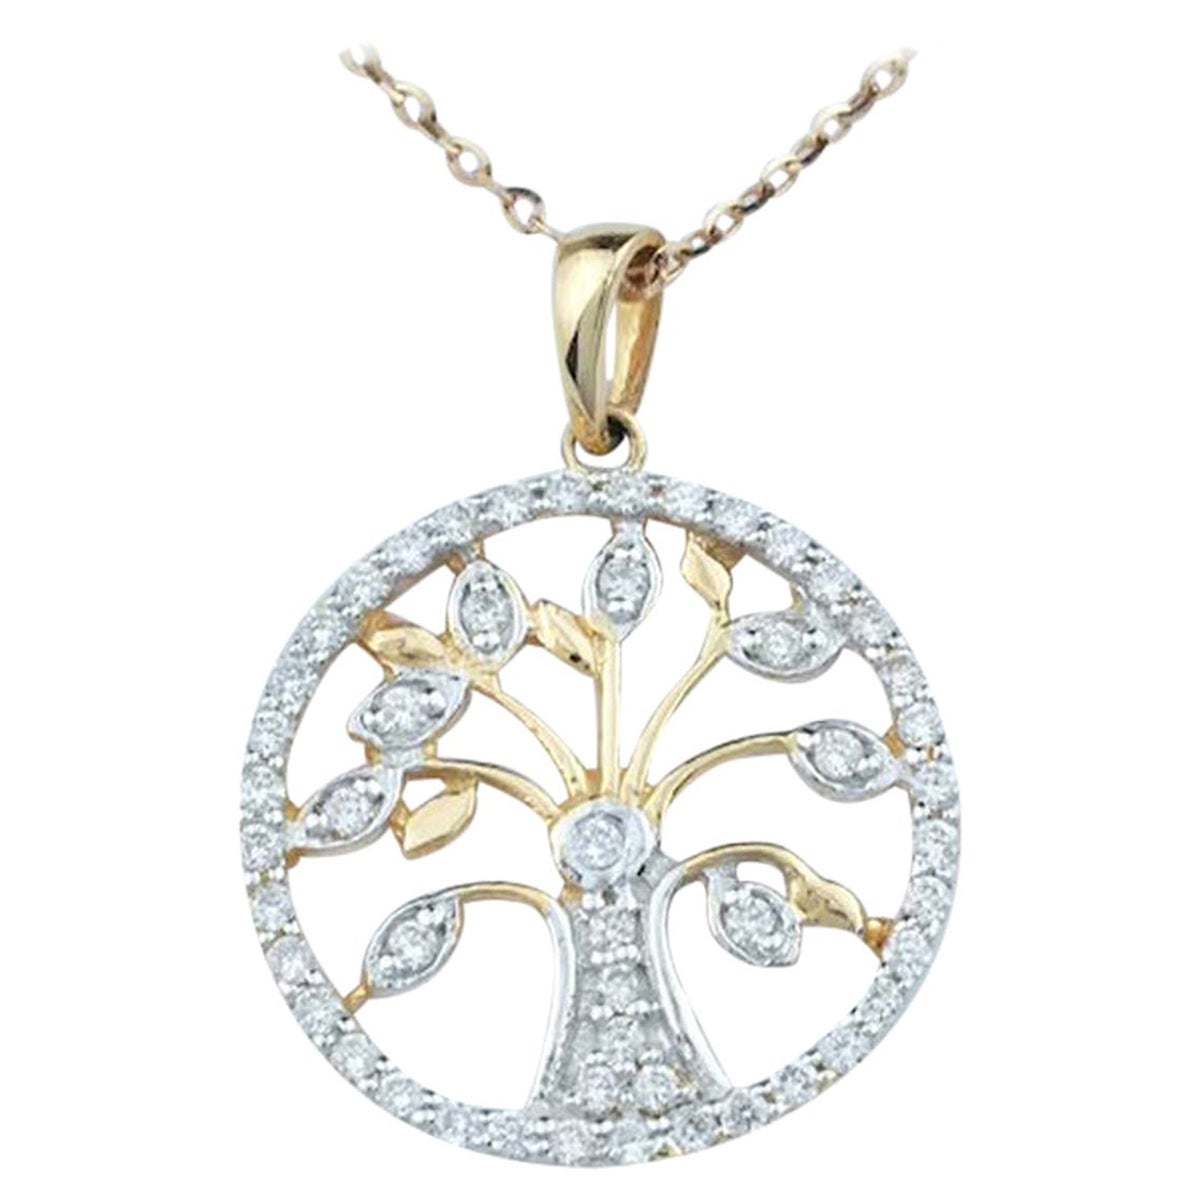 Tree of Life Necklace with natural diamond set is made of 14k solid gold.
Available in three colors of gold:  Rose Gold / White Gold / Yellow Gold.

Natural genuine round cut diamond each diamond is hand selected by me to ensure quality and set by a